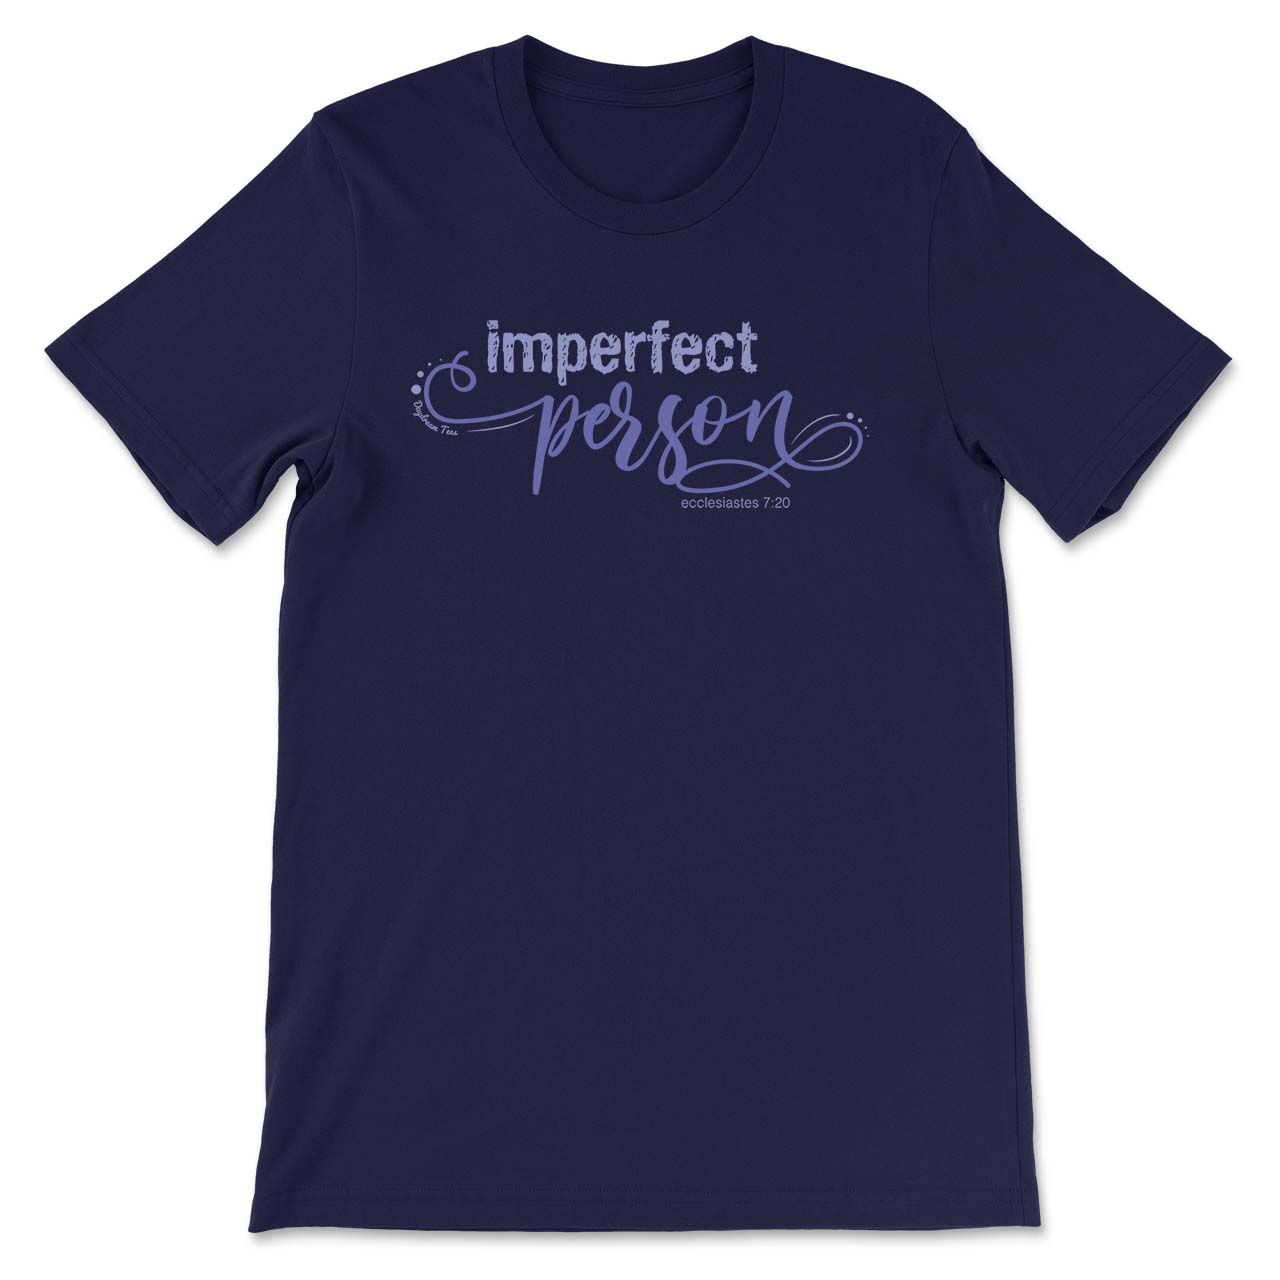 Daydream Tees Imperfect Person